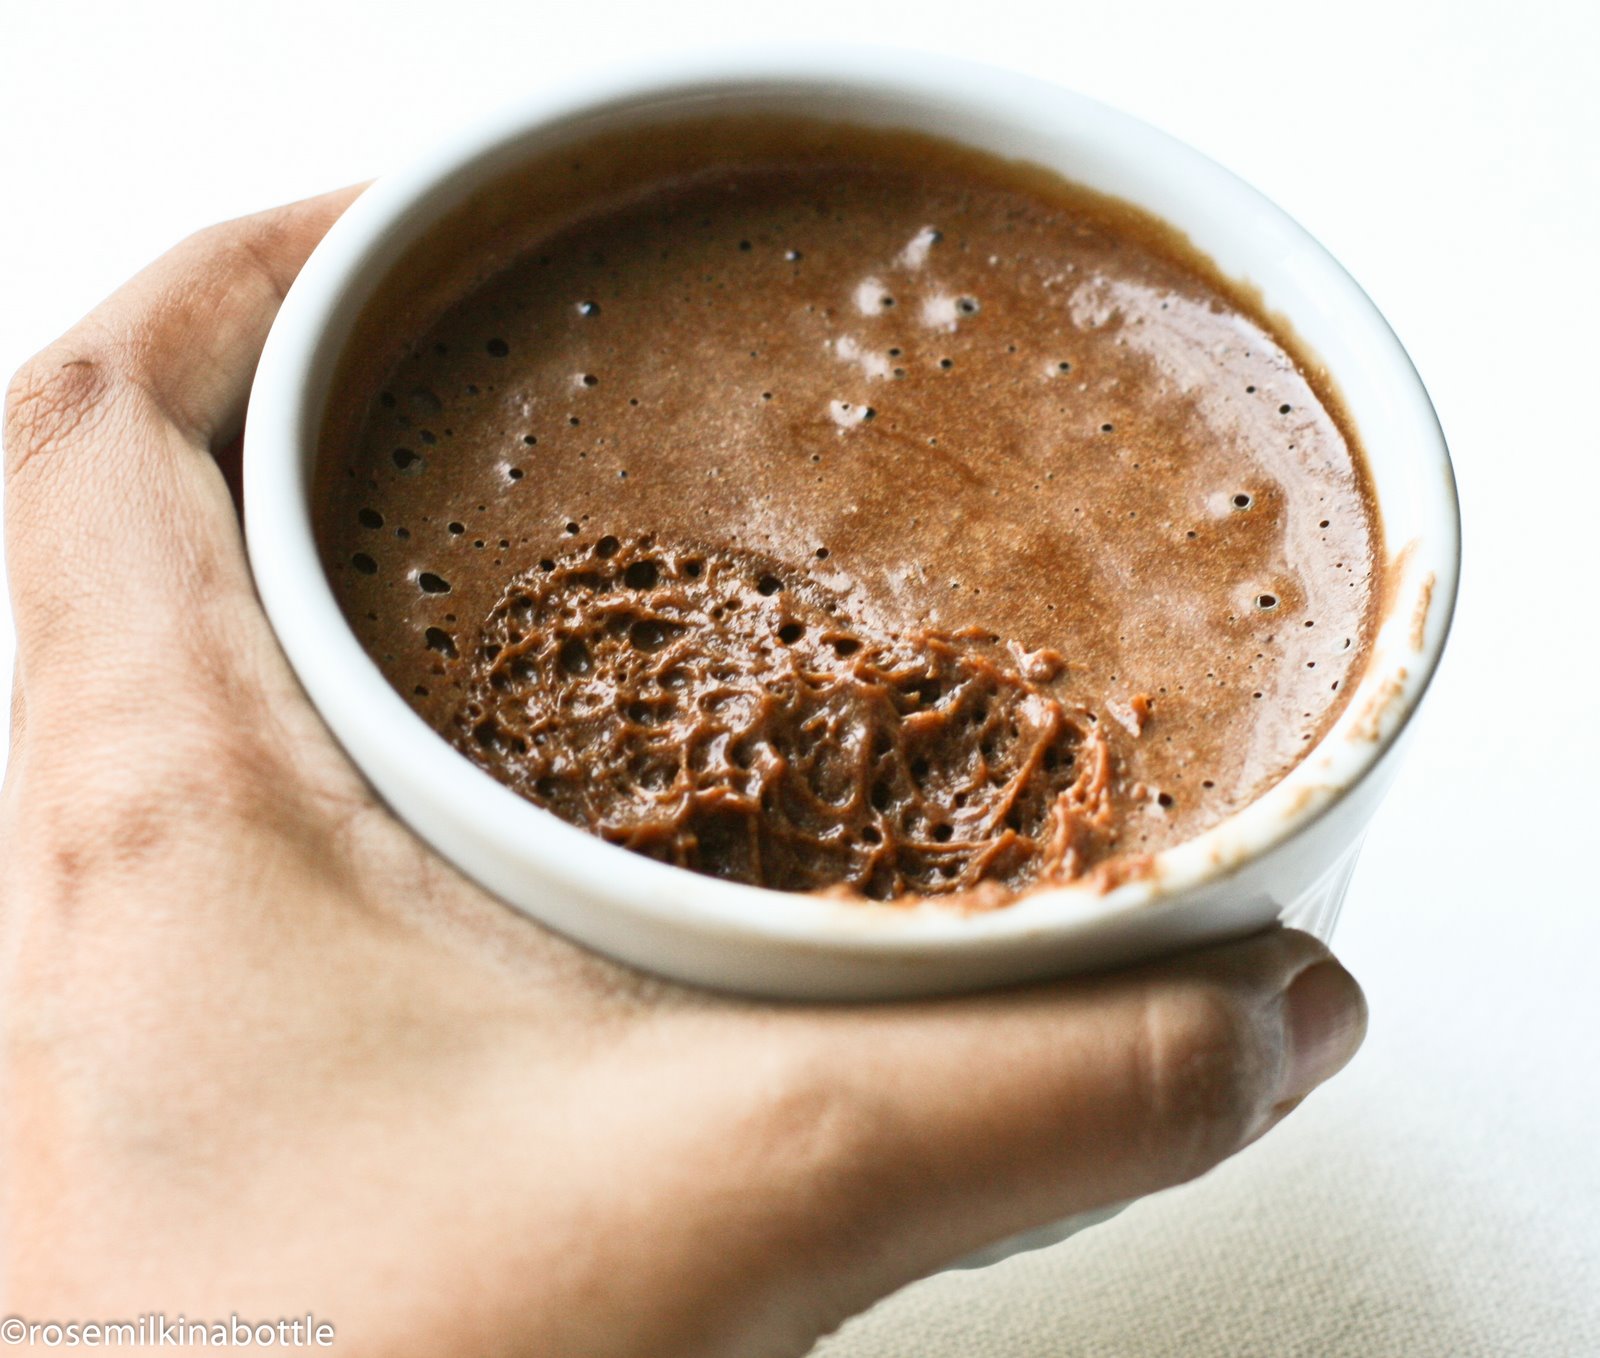 a hand holds a coffee cup with chocolate substance on it